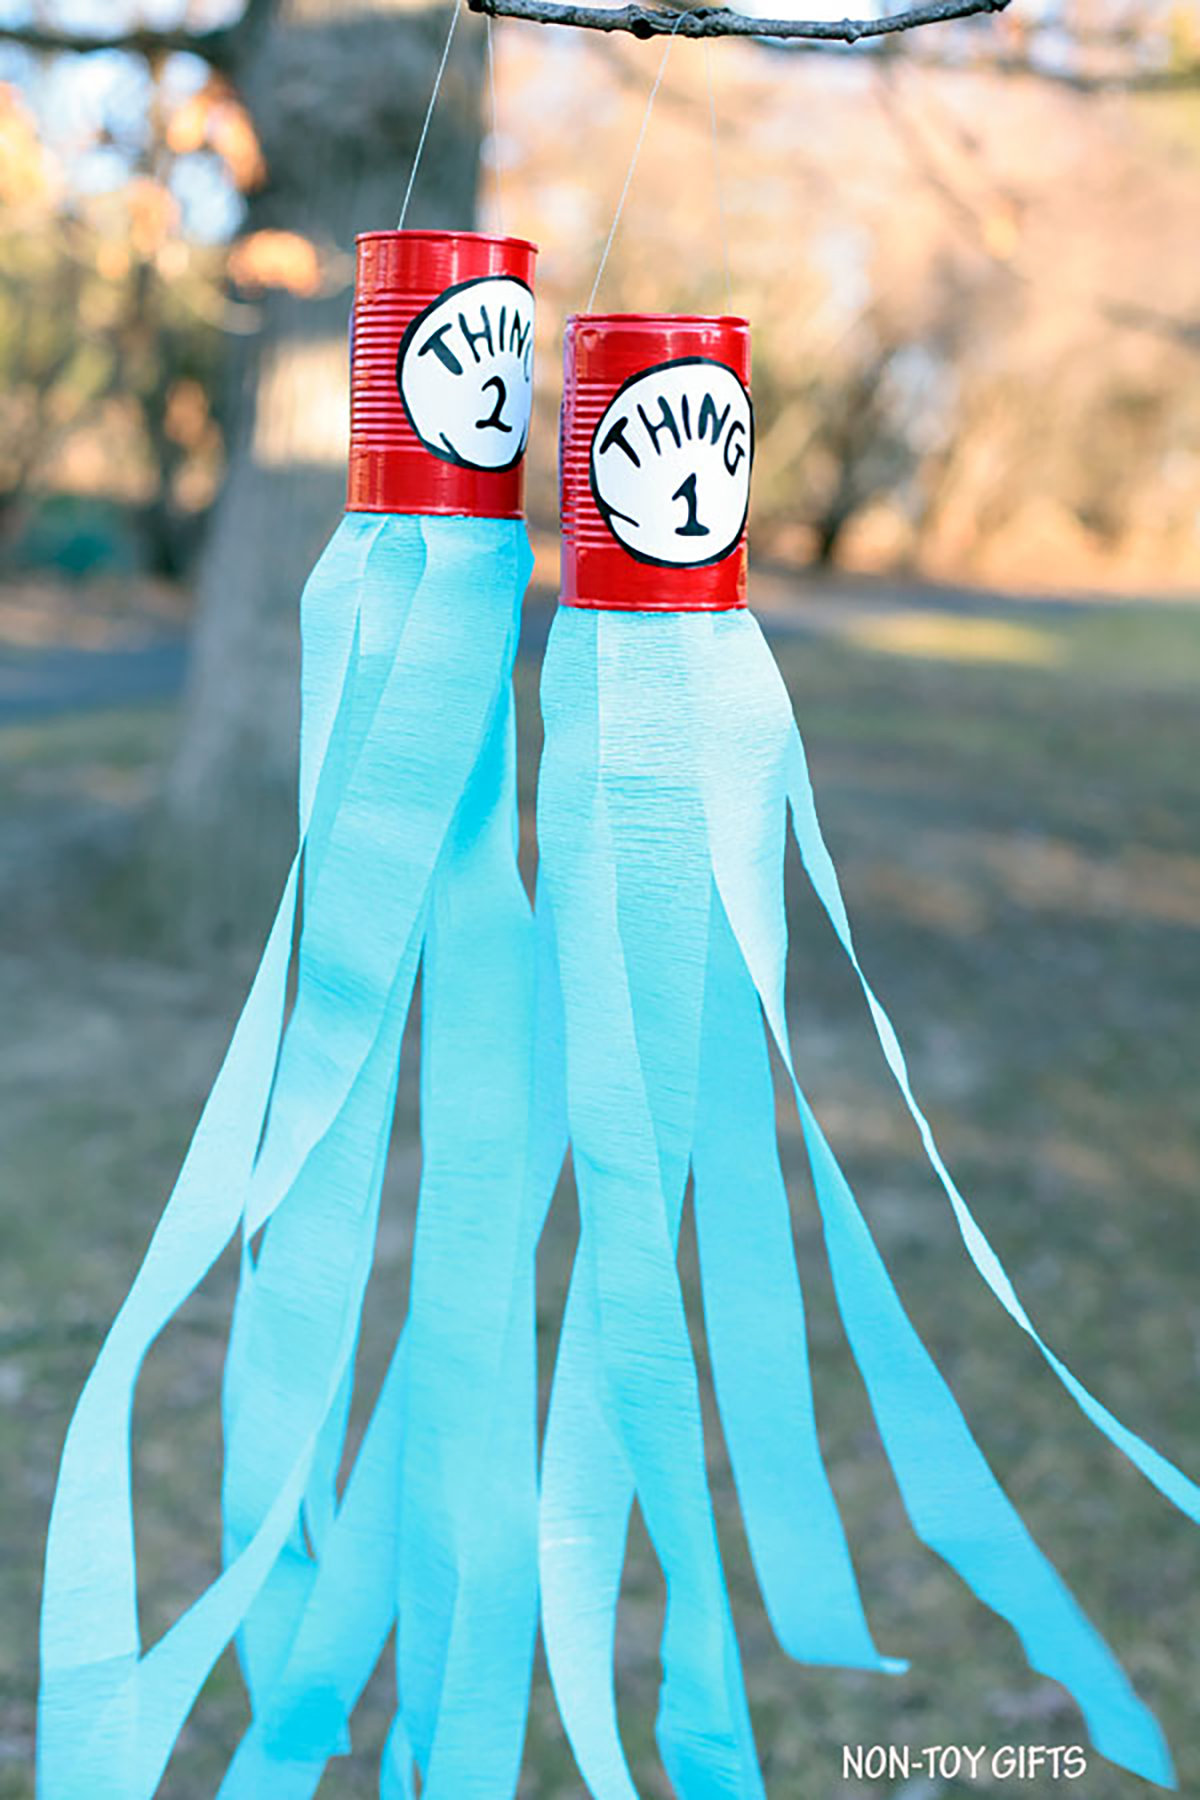 11 Creative Dr. Seuss Crafts Ignite Imaginations Making Learning To Read So Much Fun